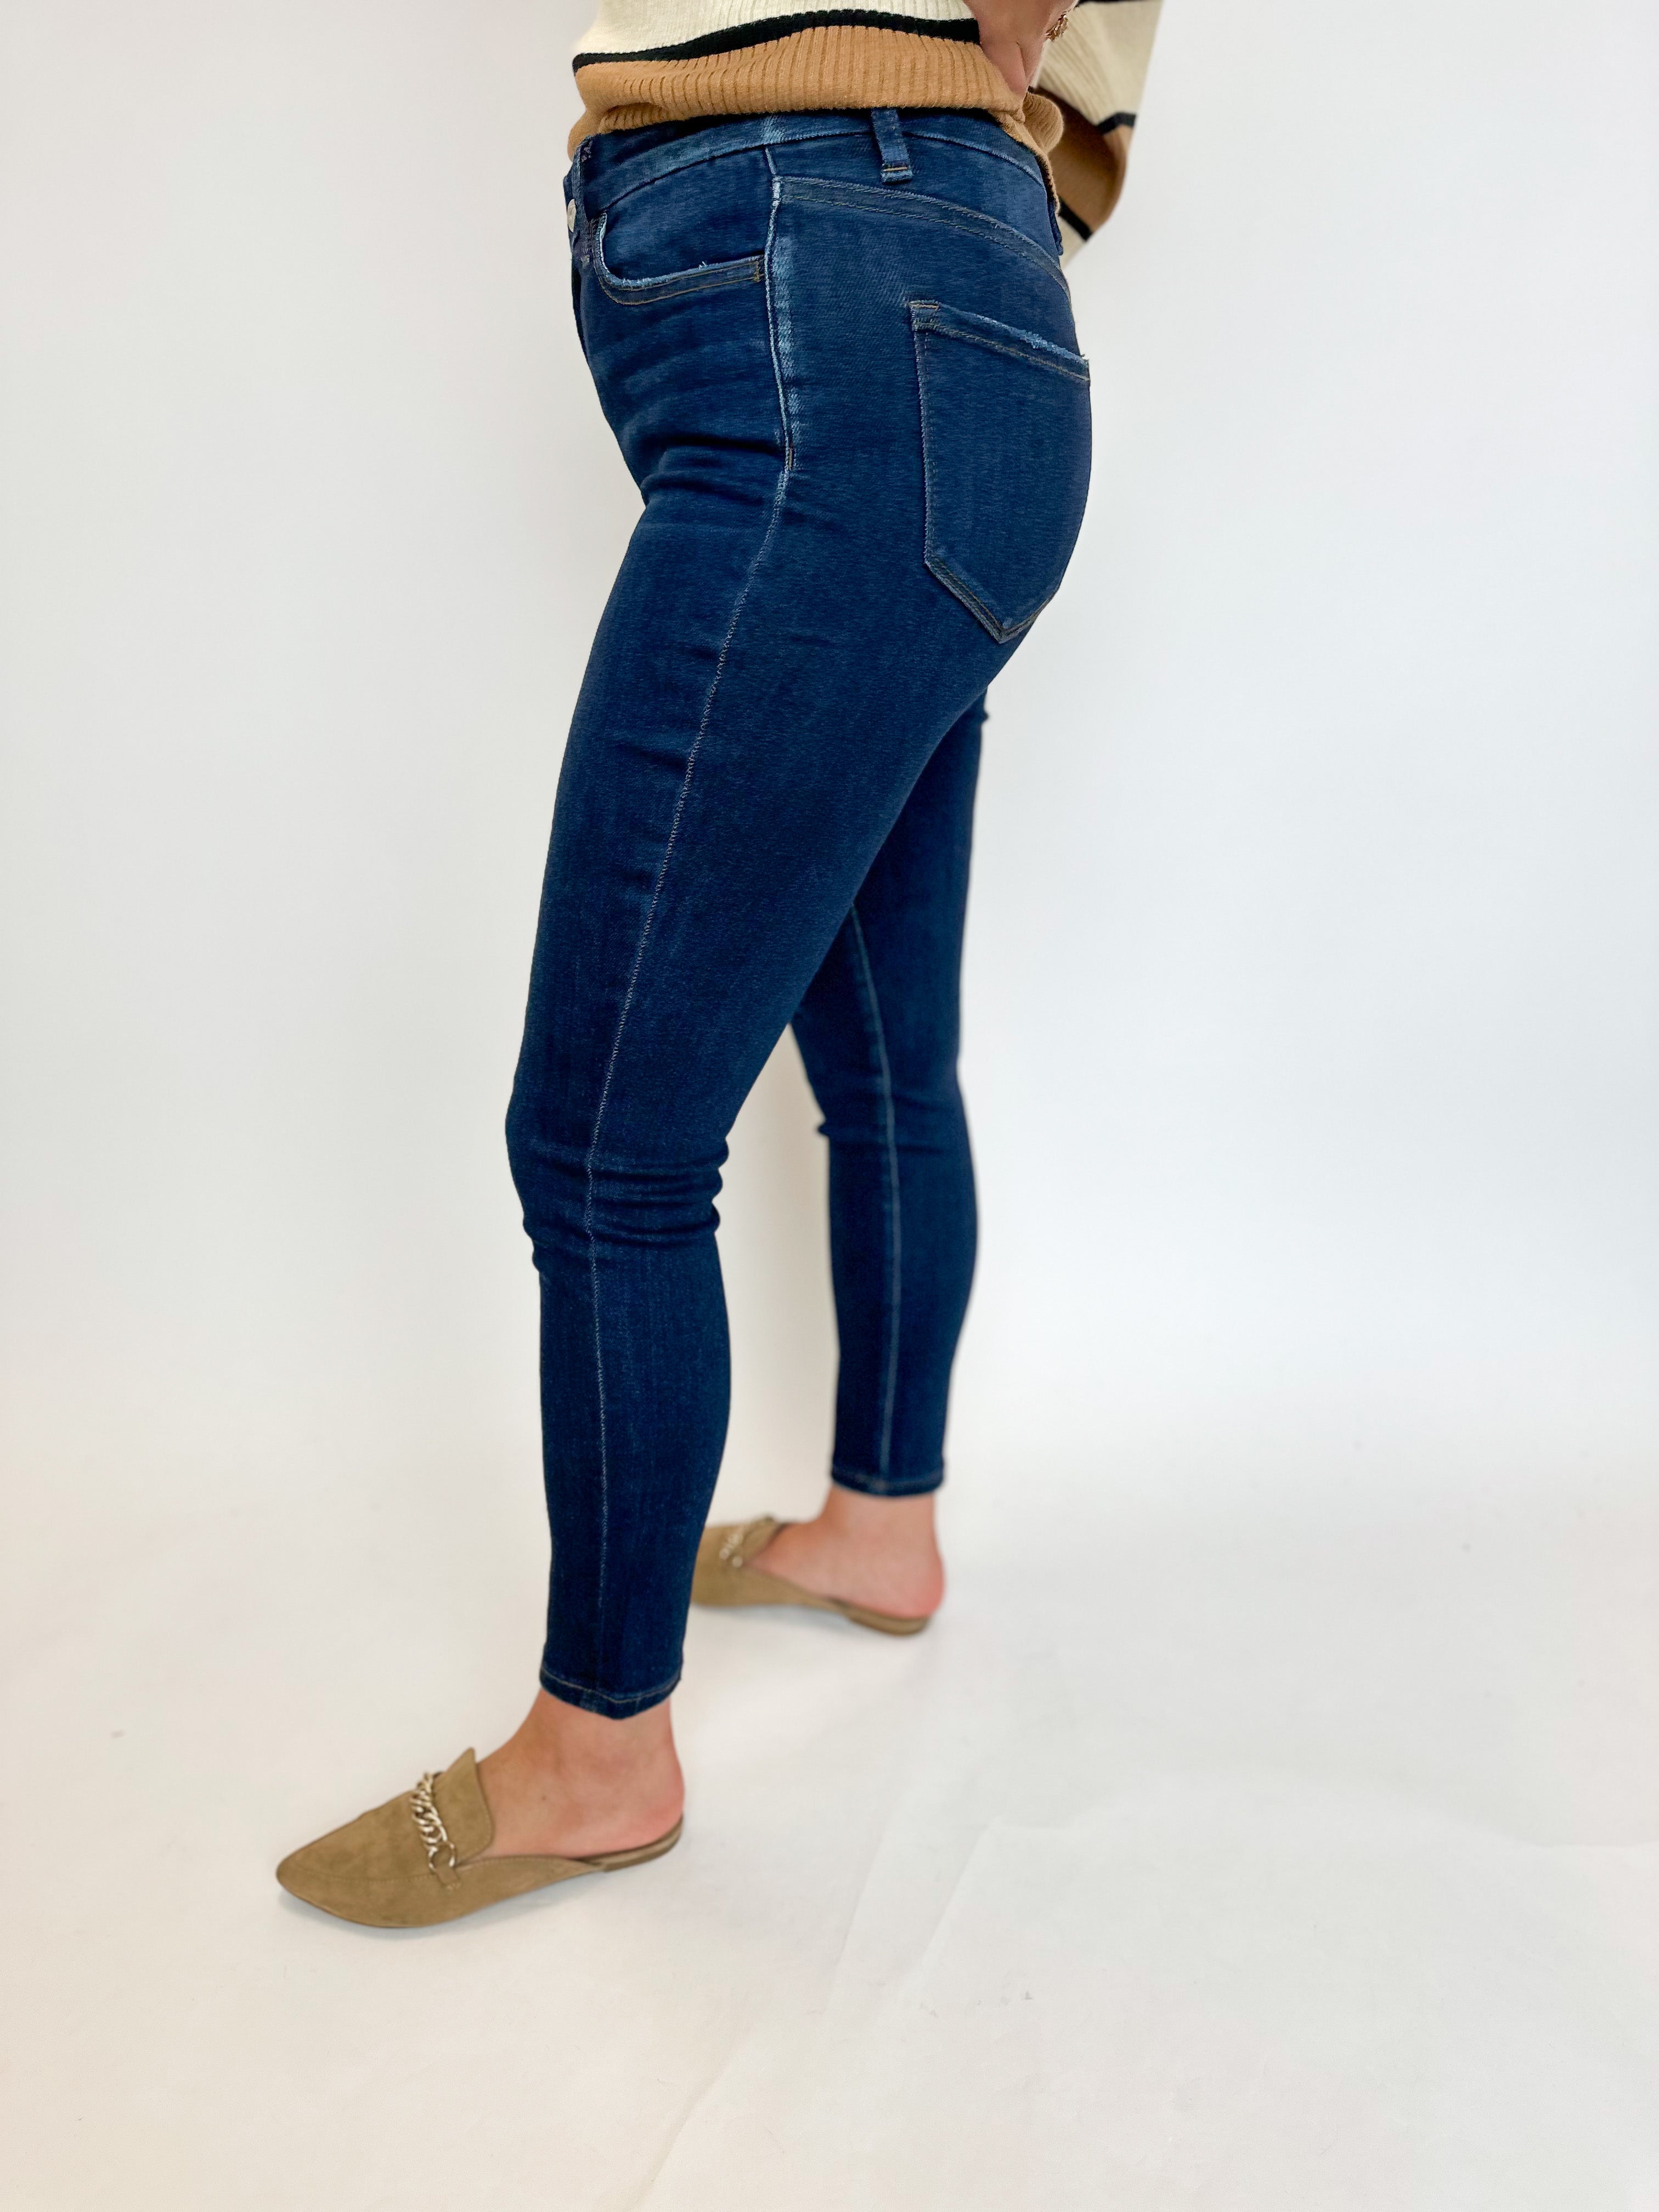 Vervet High Rise Dark Wash Skinny Jeans-400 Pants-VEVERT BY FLYING MONKEY-July & June Women's Fashion Boutique Located in San Antonio, Texas